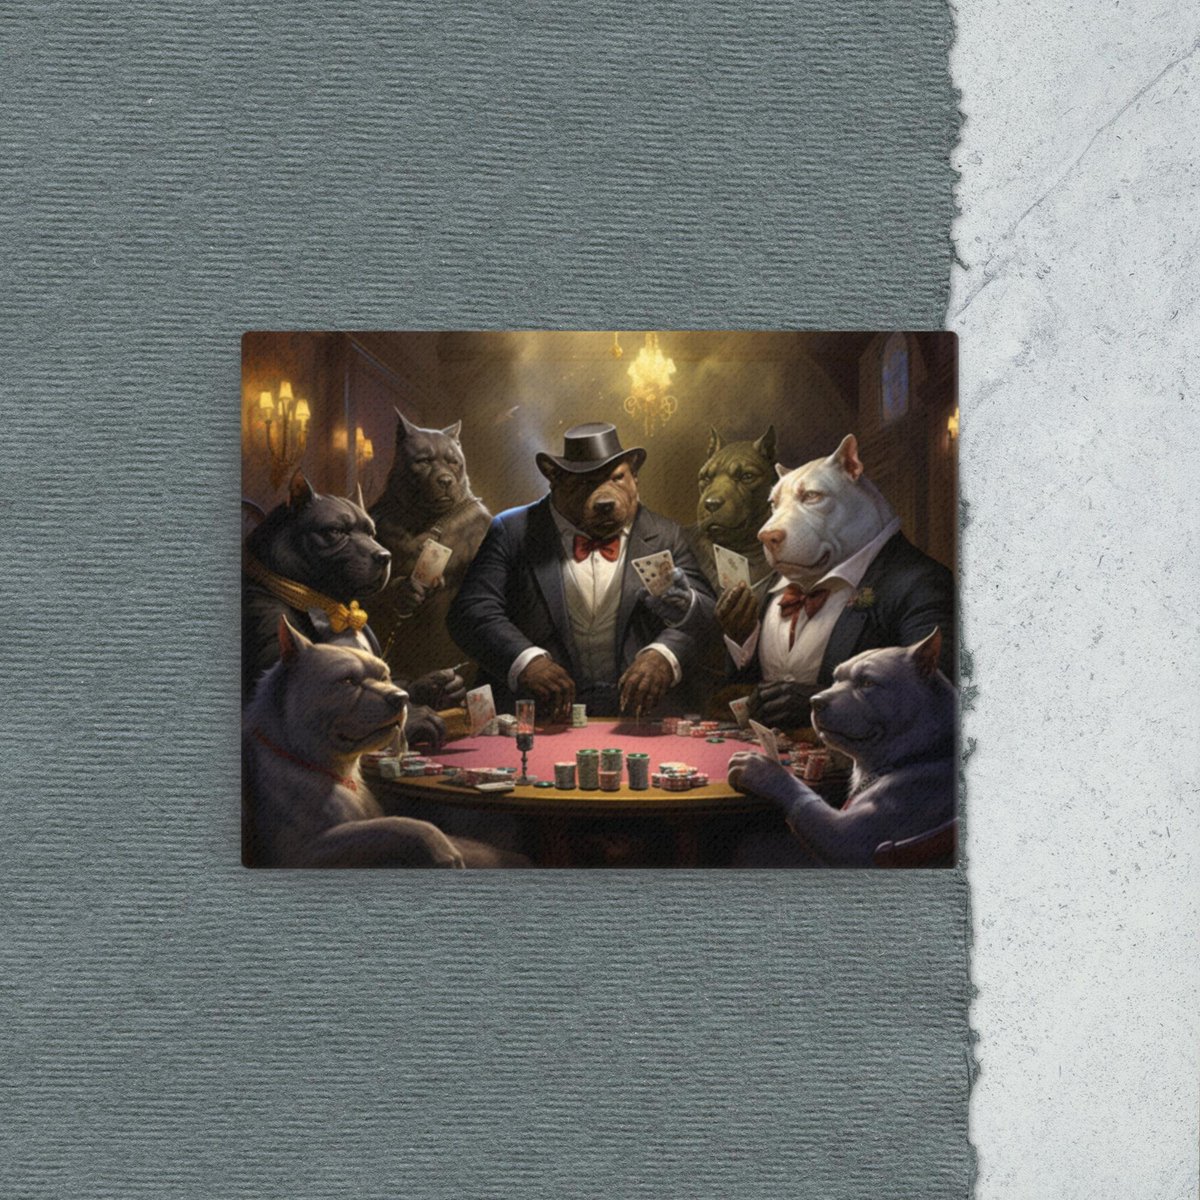 Check out my #AI #wallartprint design on #canvas on etsy for #doglovers and #poker fans!